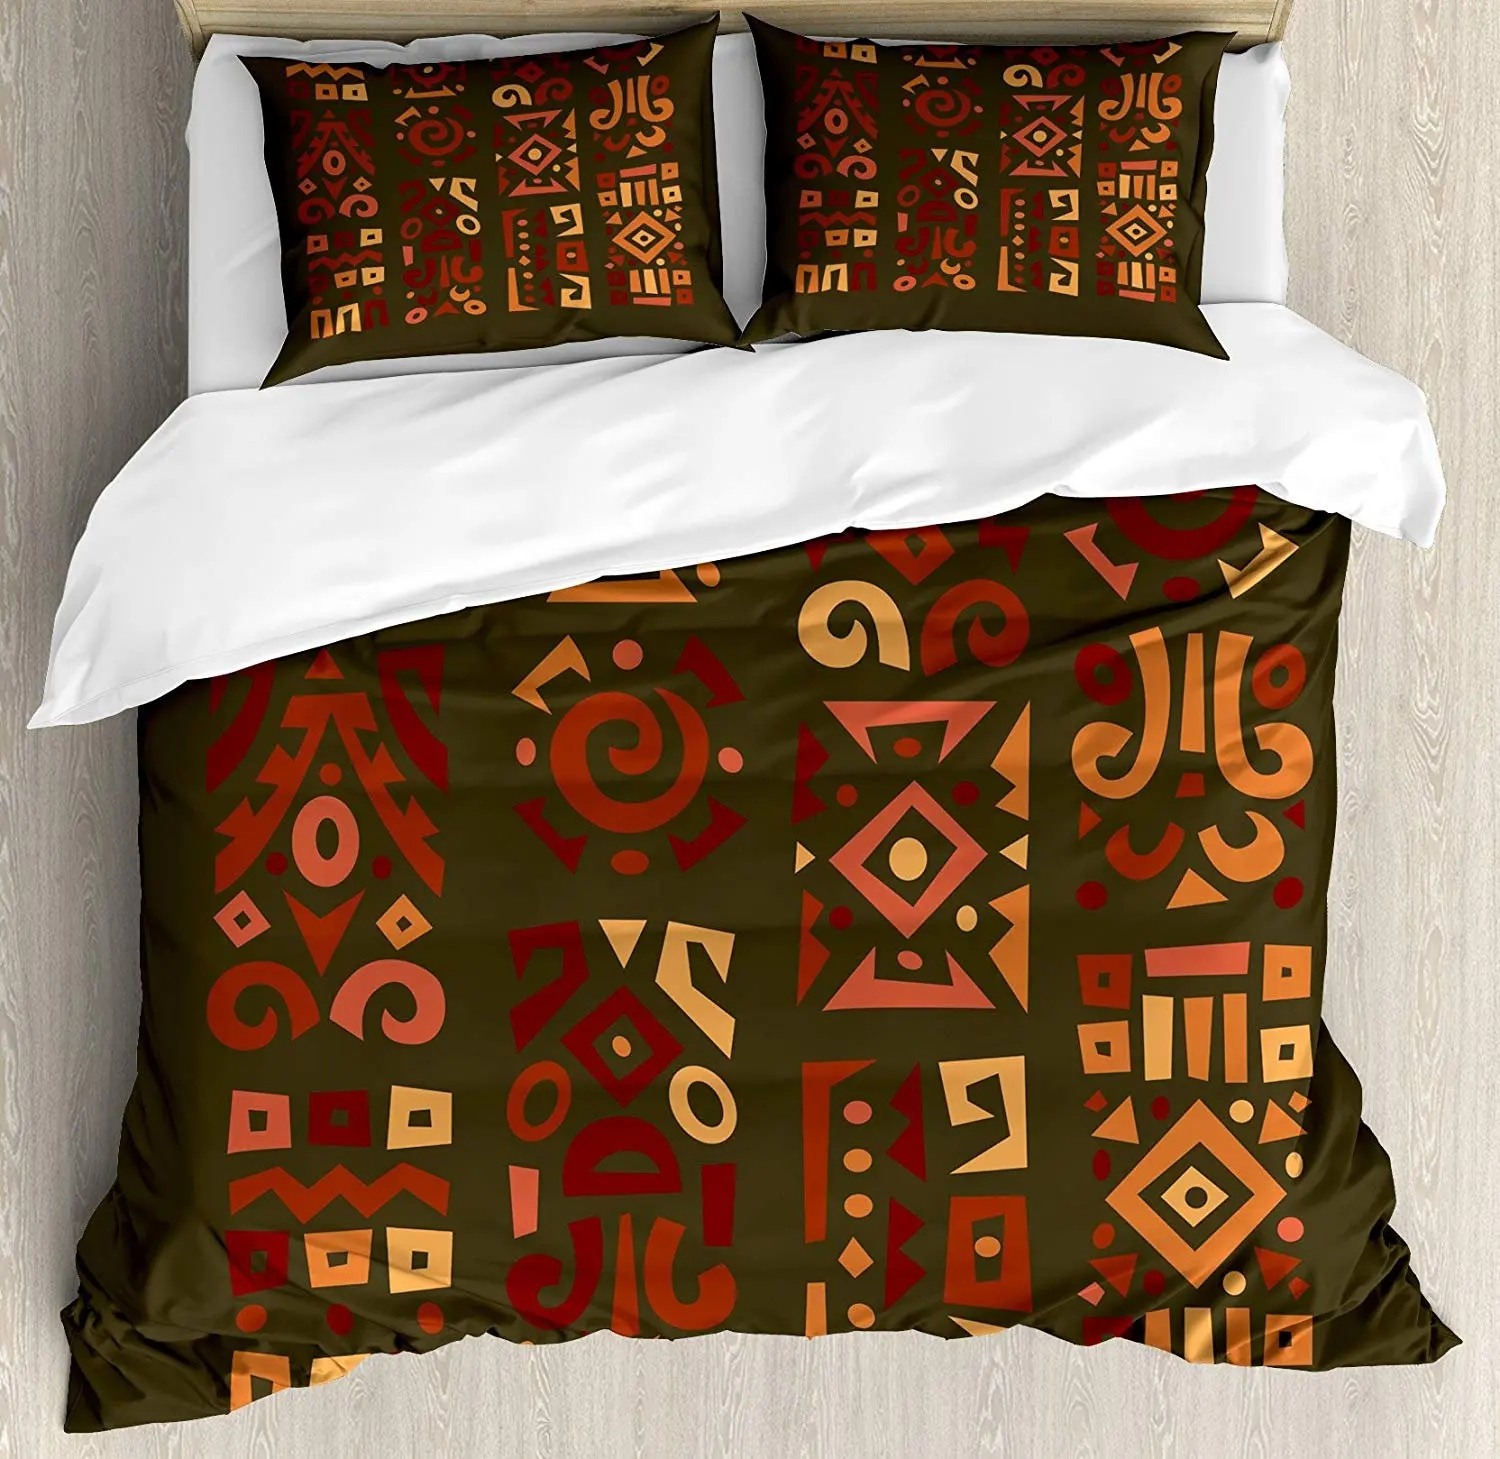 

Earth Tones Bedding Set Doodle Style Graphic African Figures in Four Vertical Borders Ethnic Accents Duvet Cover Pillowcase